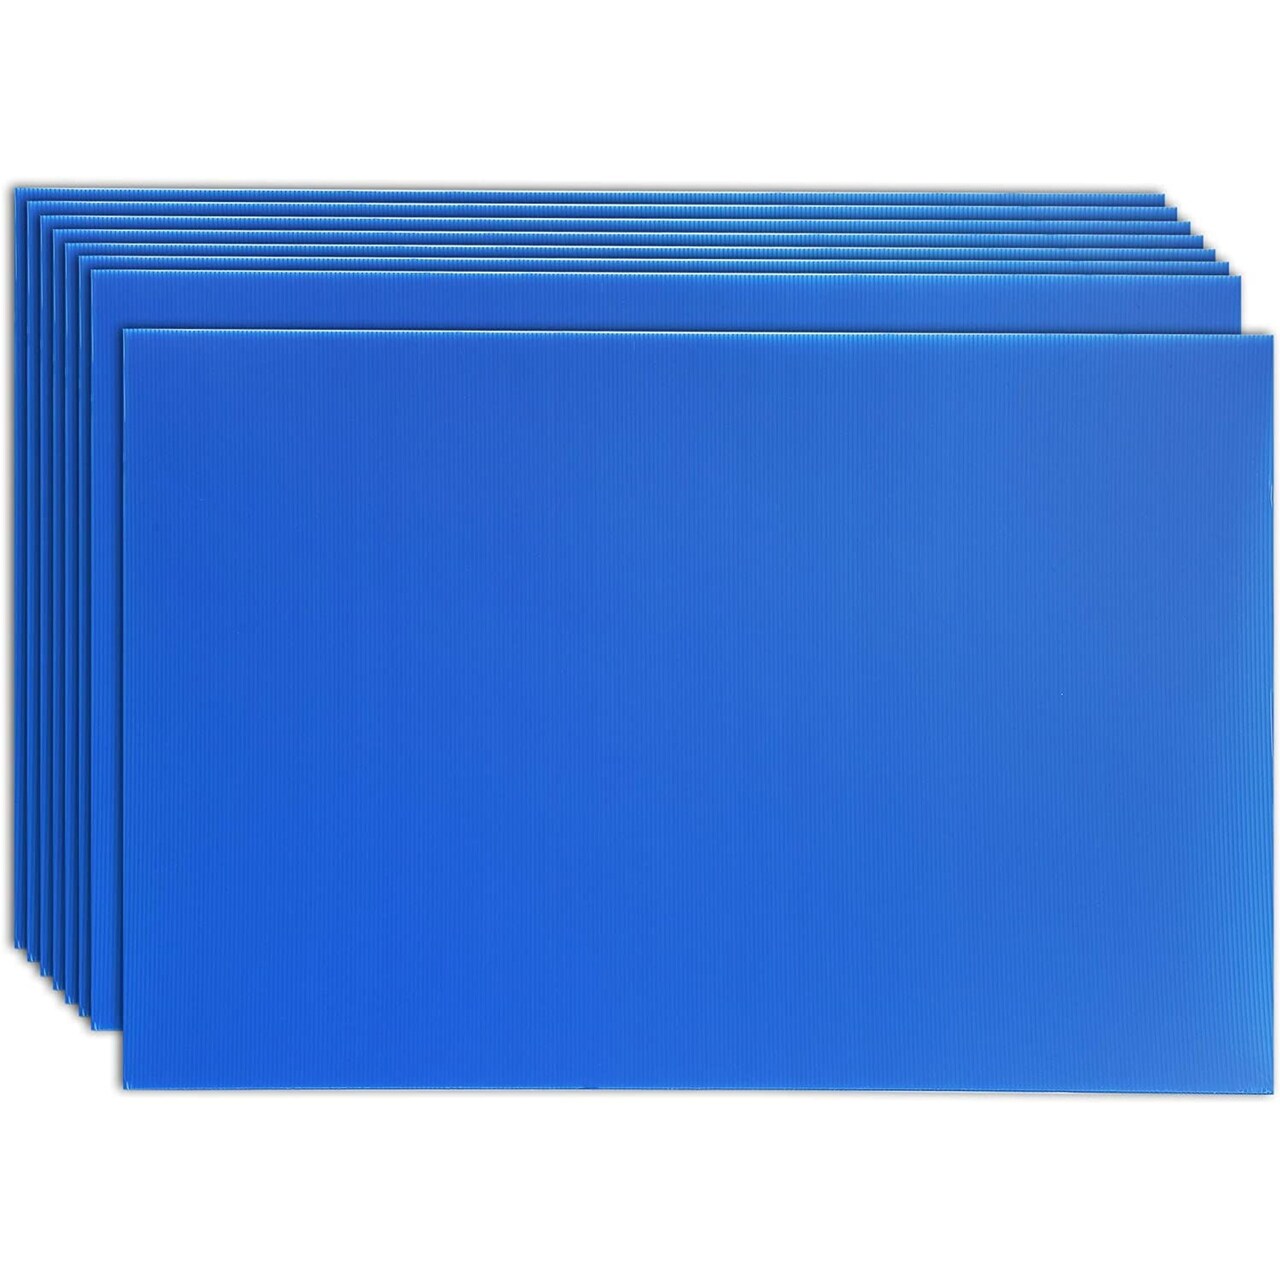 8 Pack Corrugated Plastic Yard Signs 24x36 for Outdoor, Open House,  Birthday, Lawn, Foam Poster Board with 4mm Blank Surface (Blue)